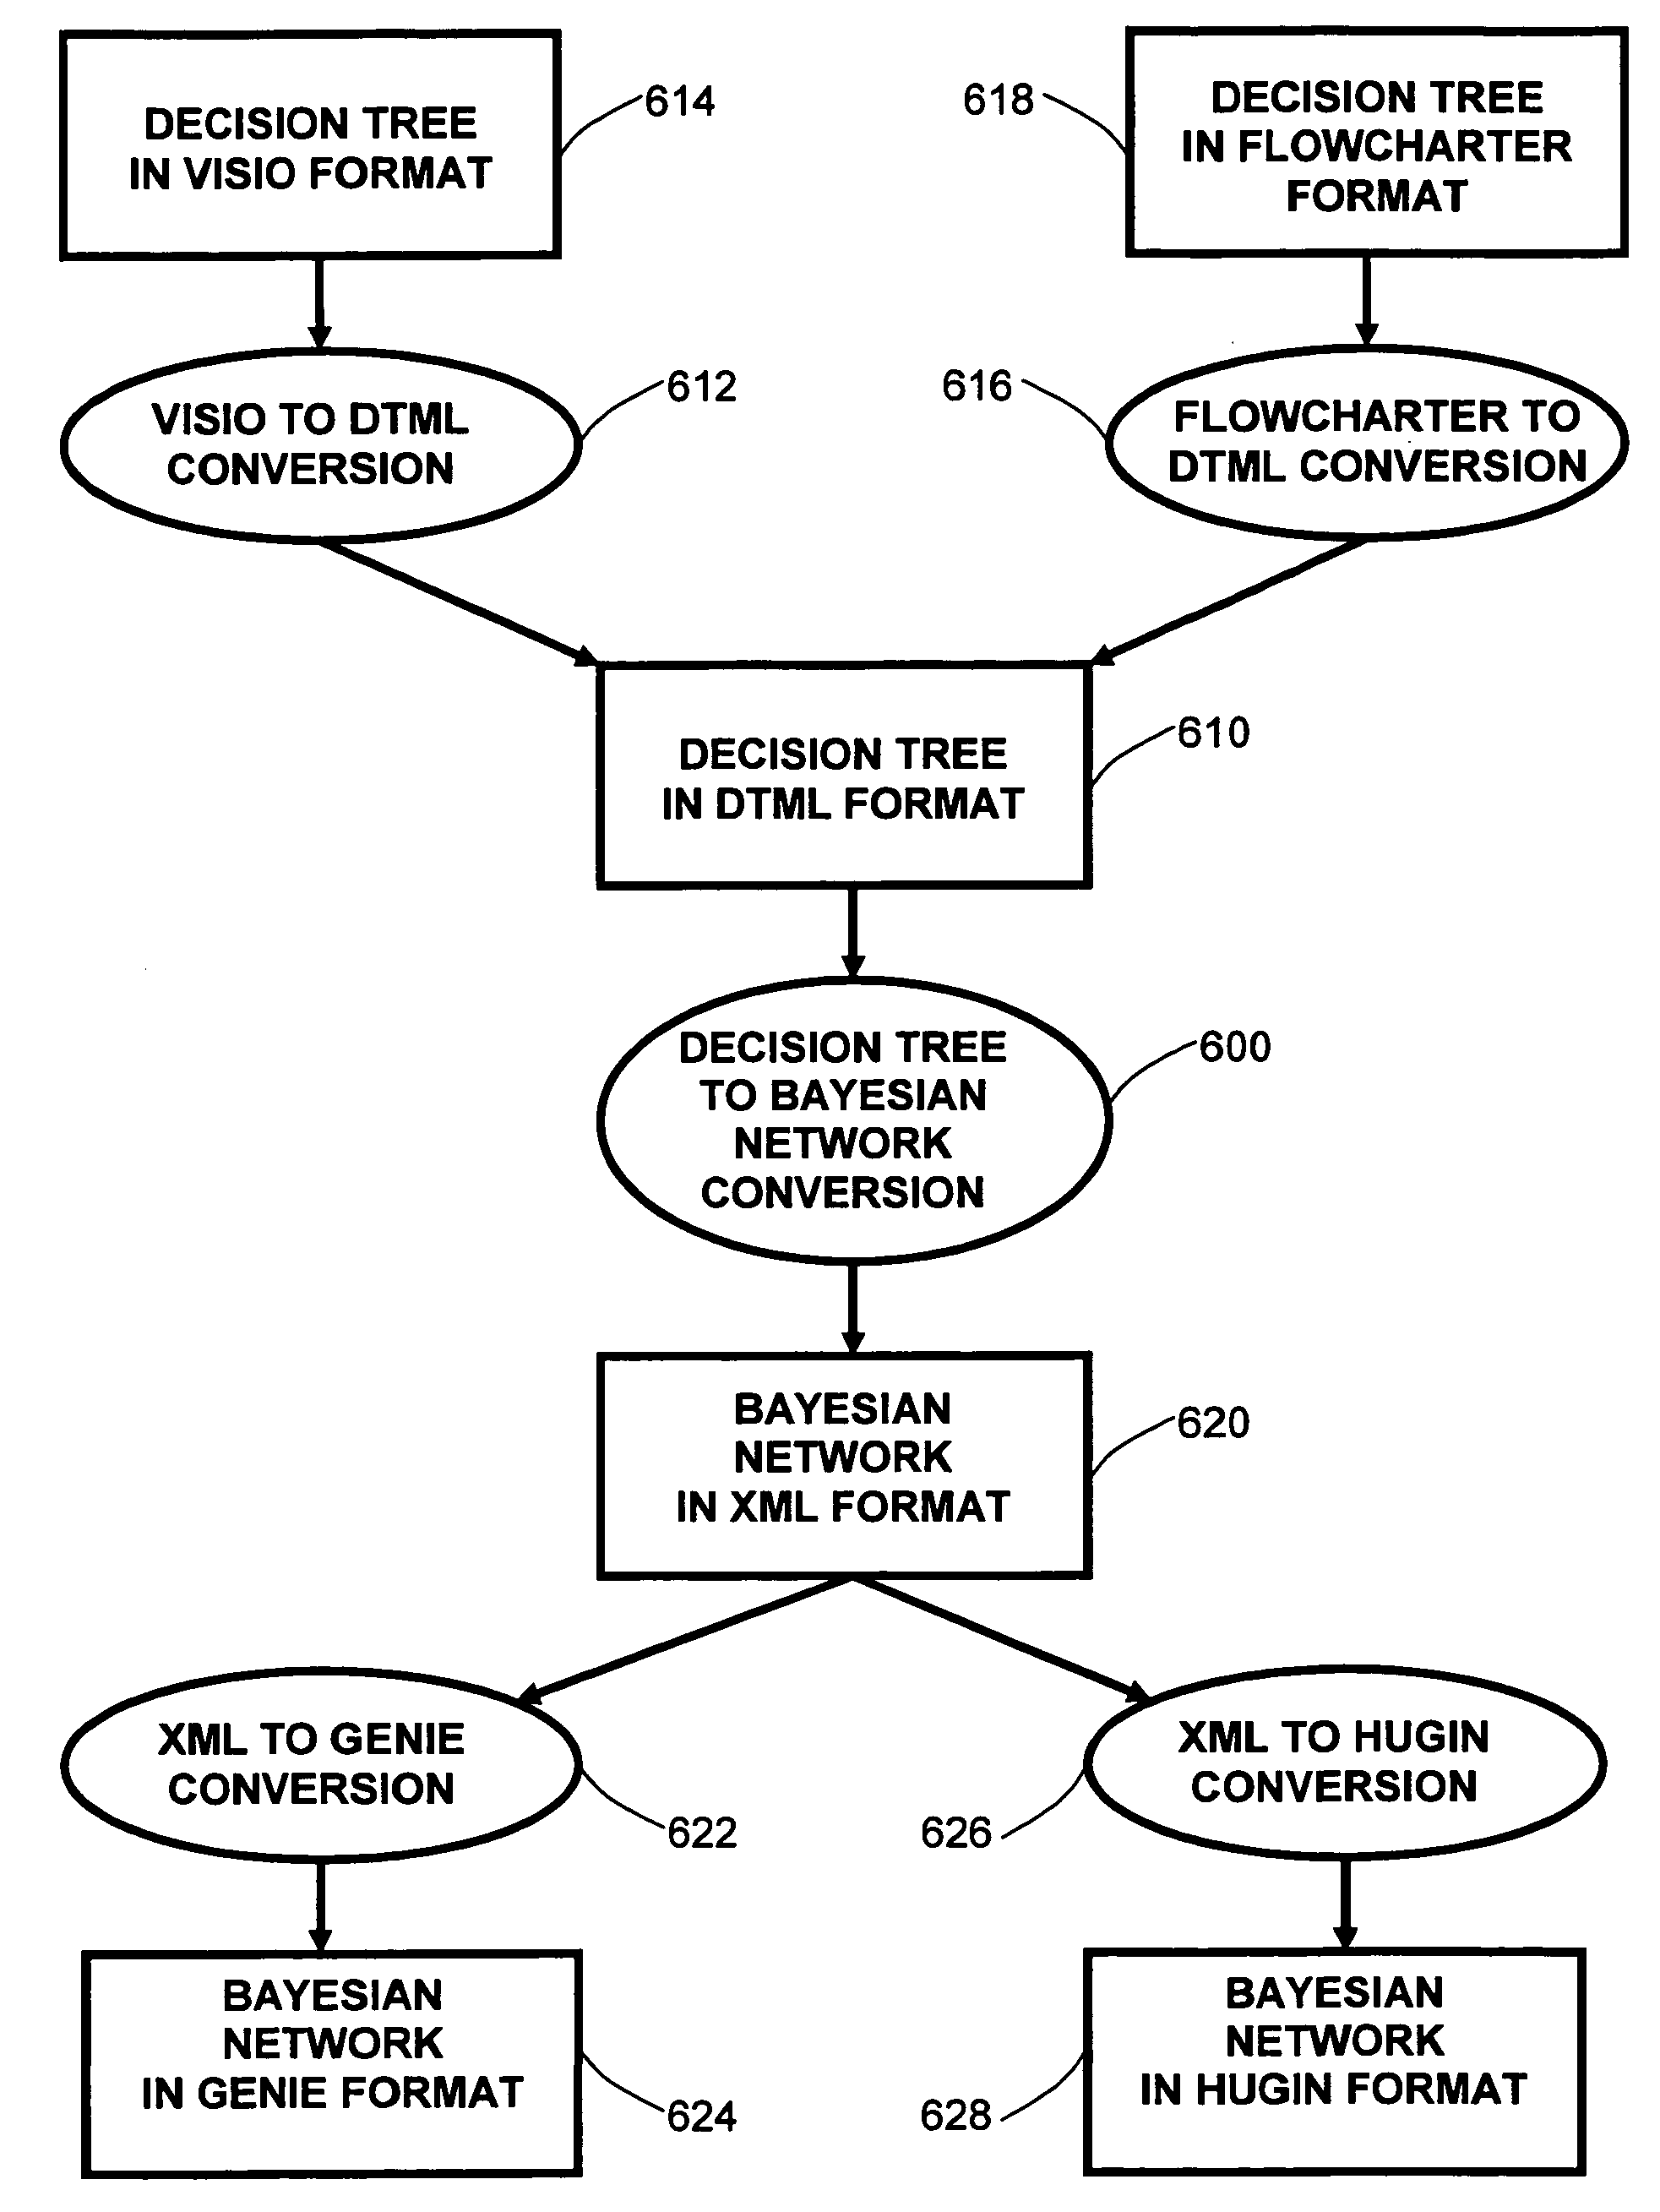 Generation of decision trees by means of a probabilistic model